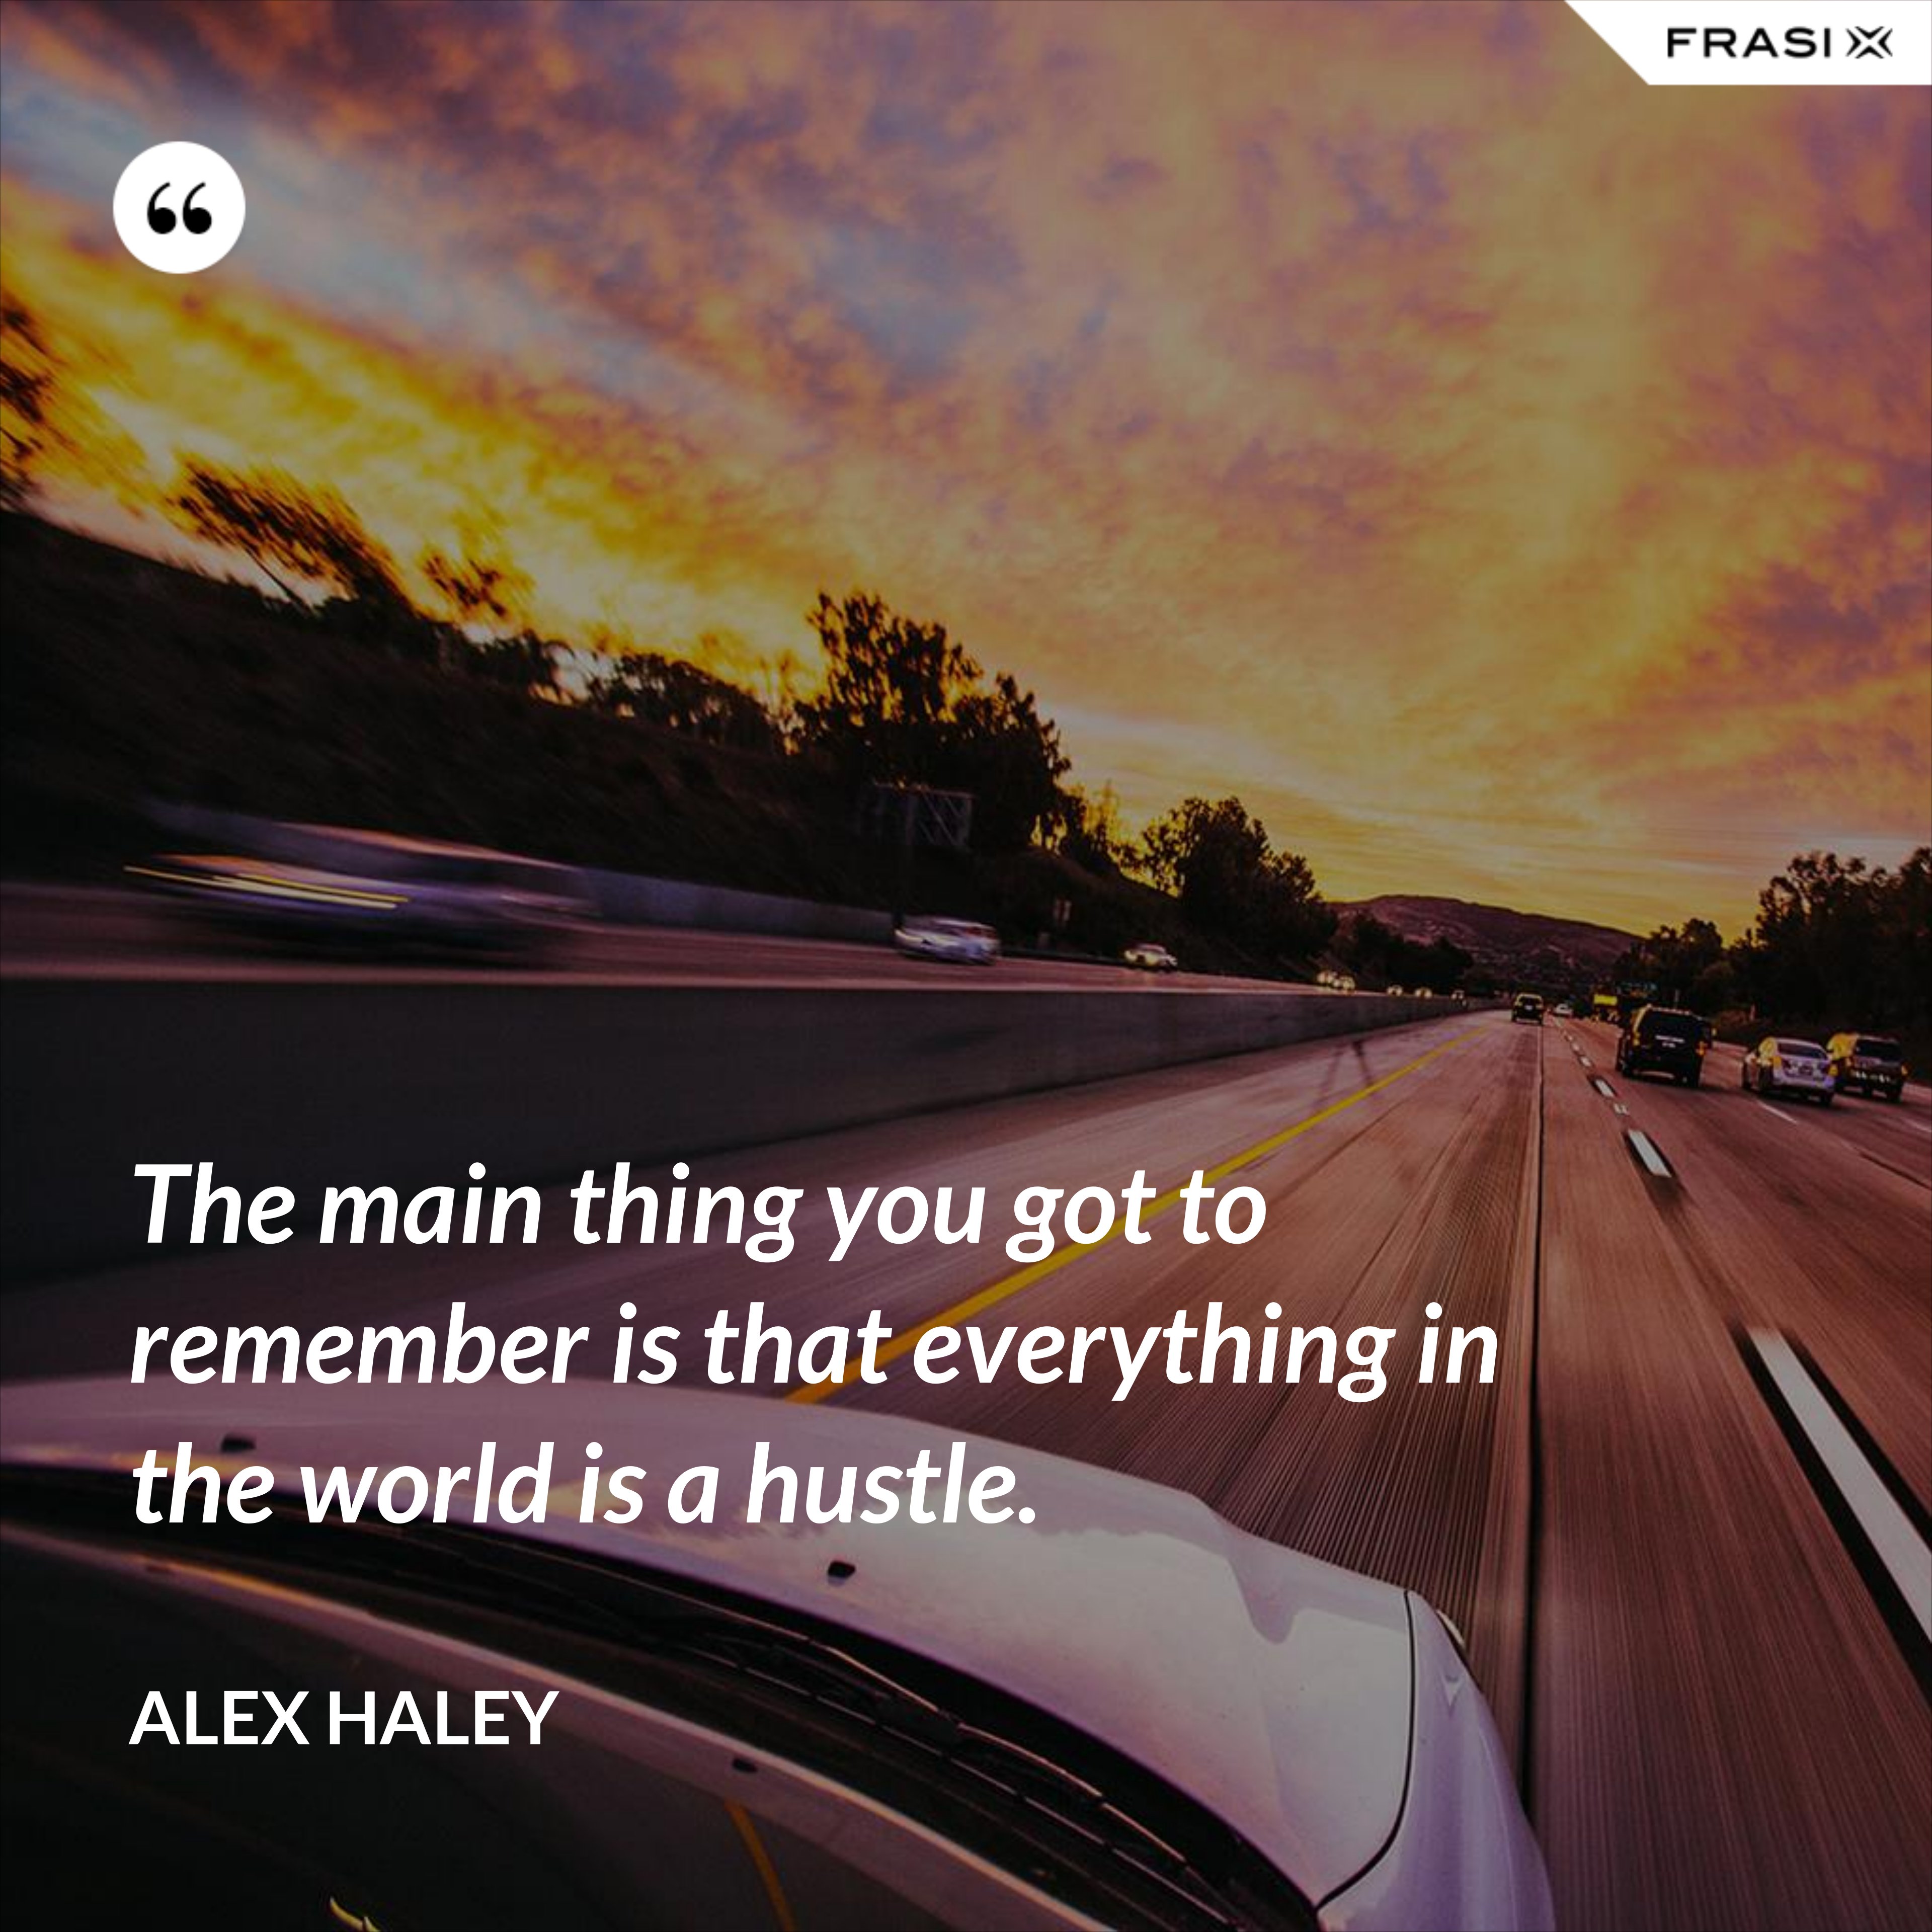 The main thing you got to remember is that everything in the world is a hustle. - Alex Haley